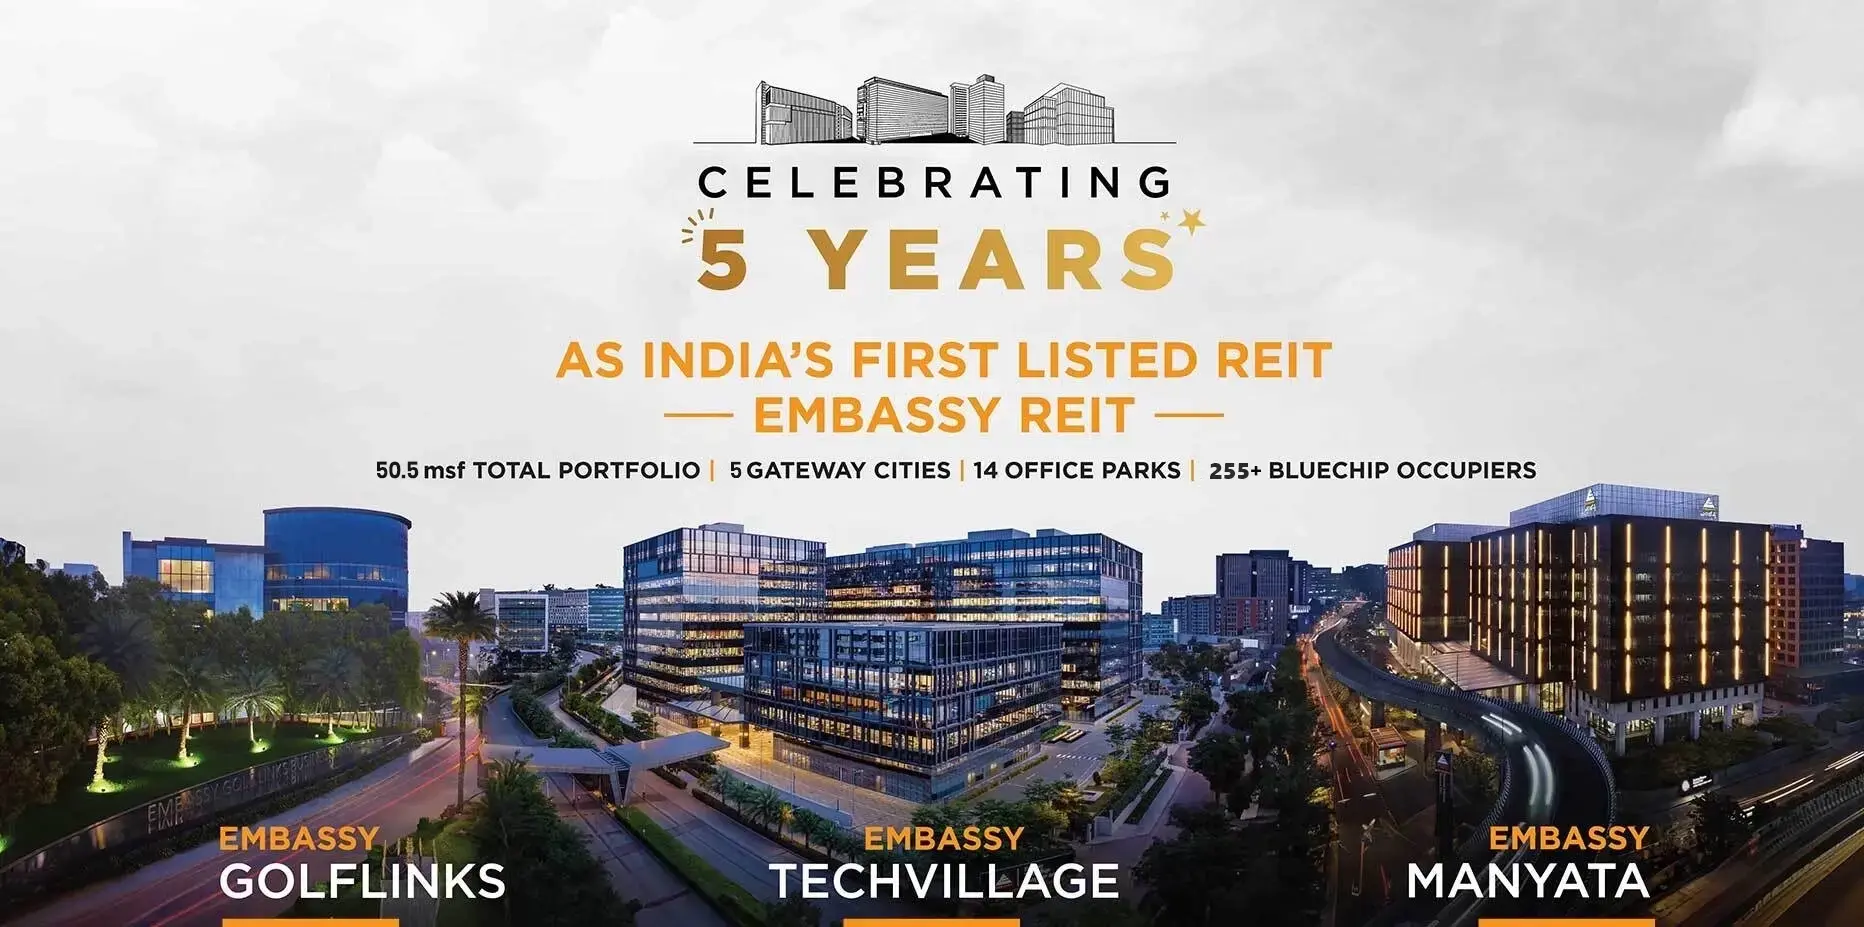 Celebrating 5 Years for Embassy REIT